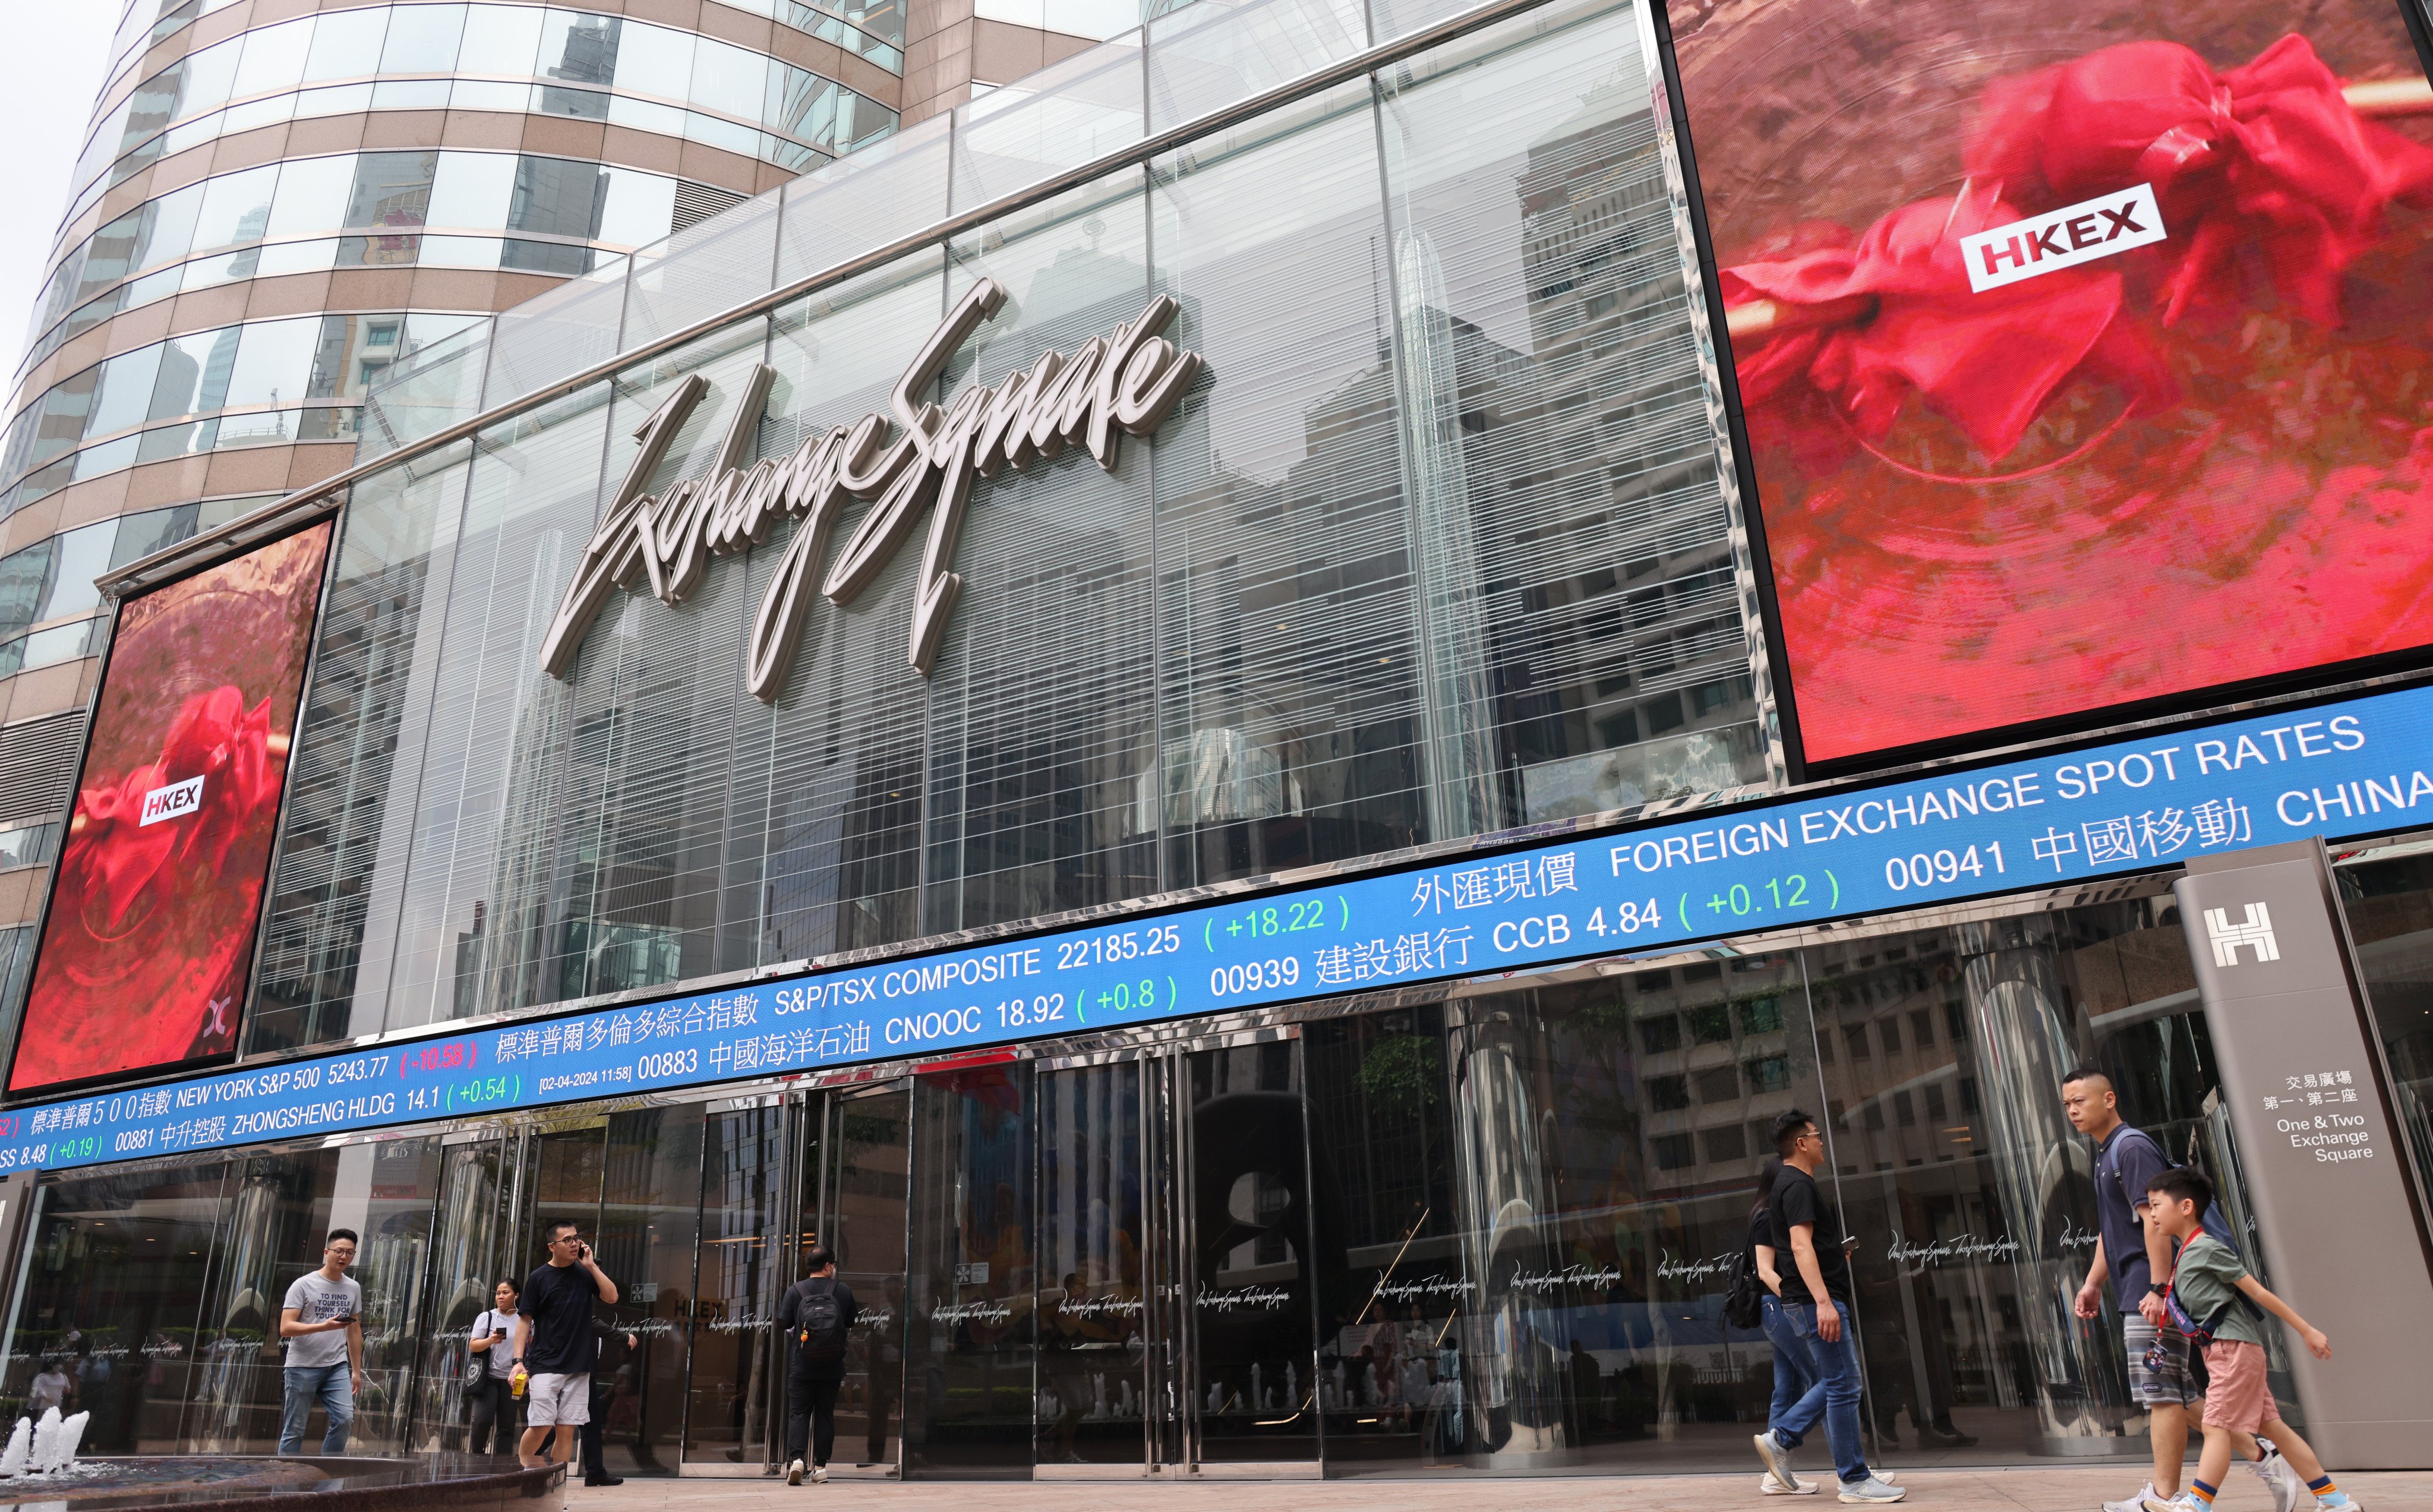 China’s regulators have announced a package of measures to boost liquidity in Hong Kong’s troubled stock market. Photo: Jelly Tse.